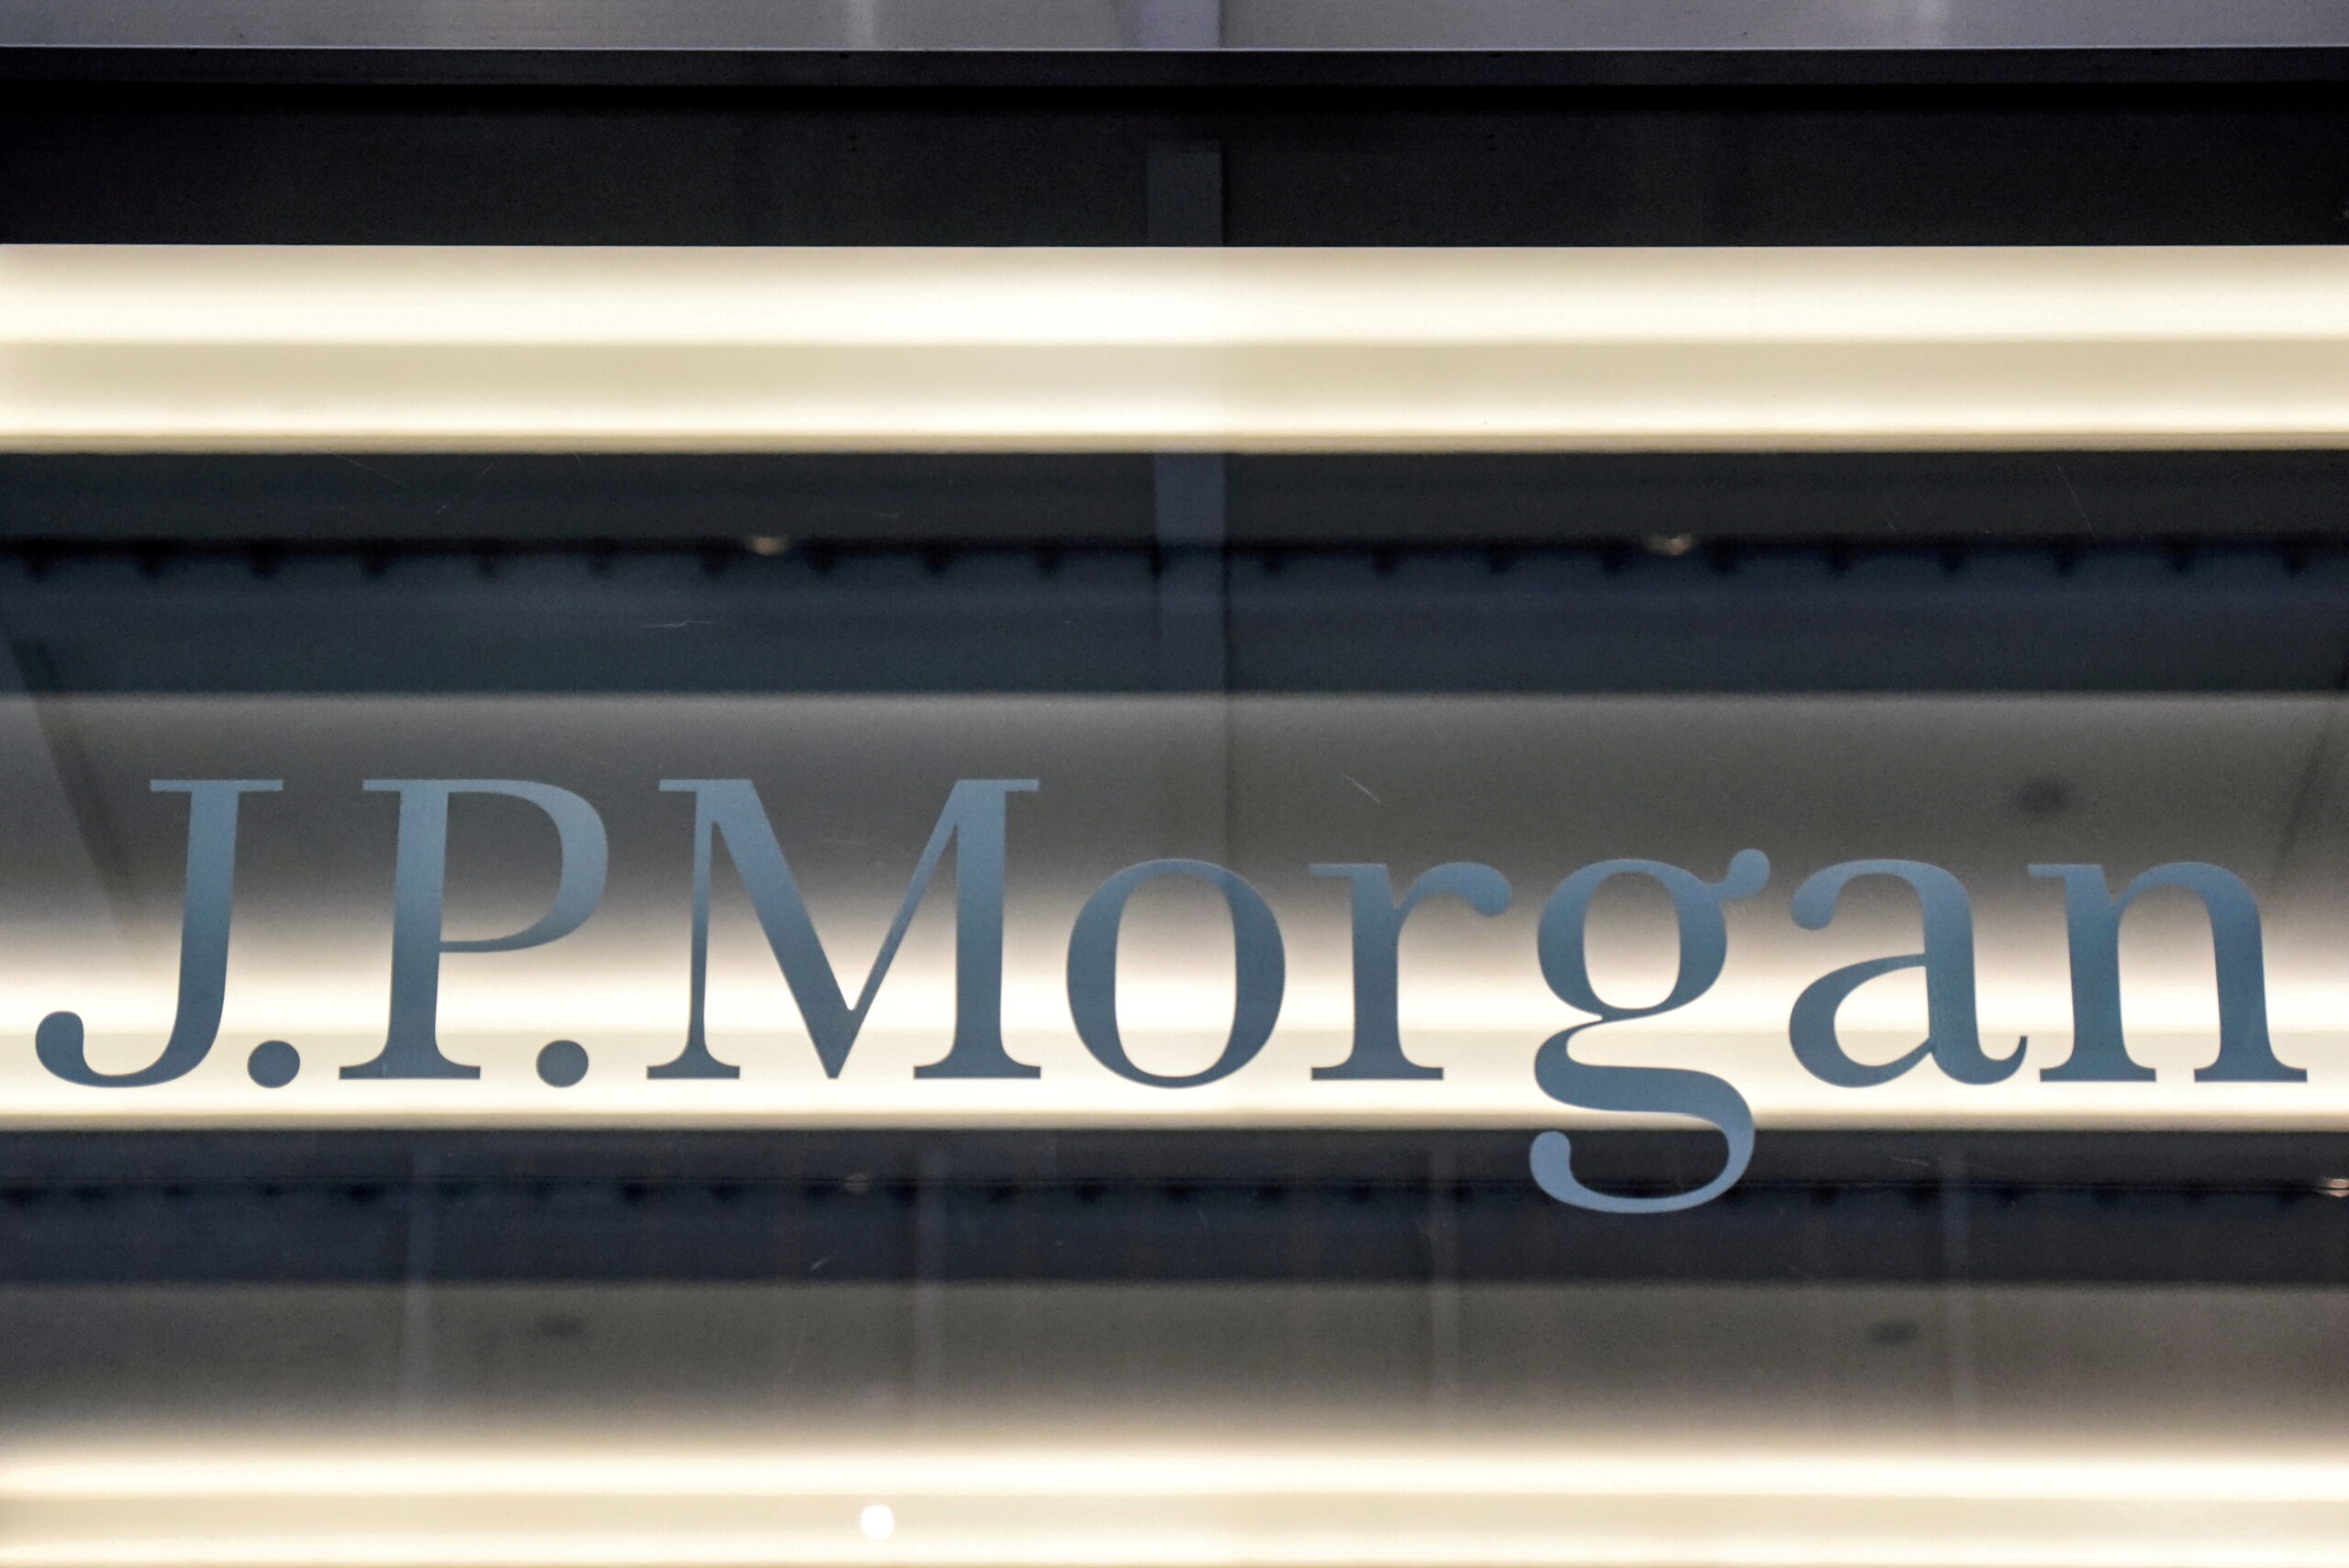  JPMorgan profit soars on recovery but questions linger over lending outlook, competition